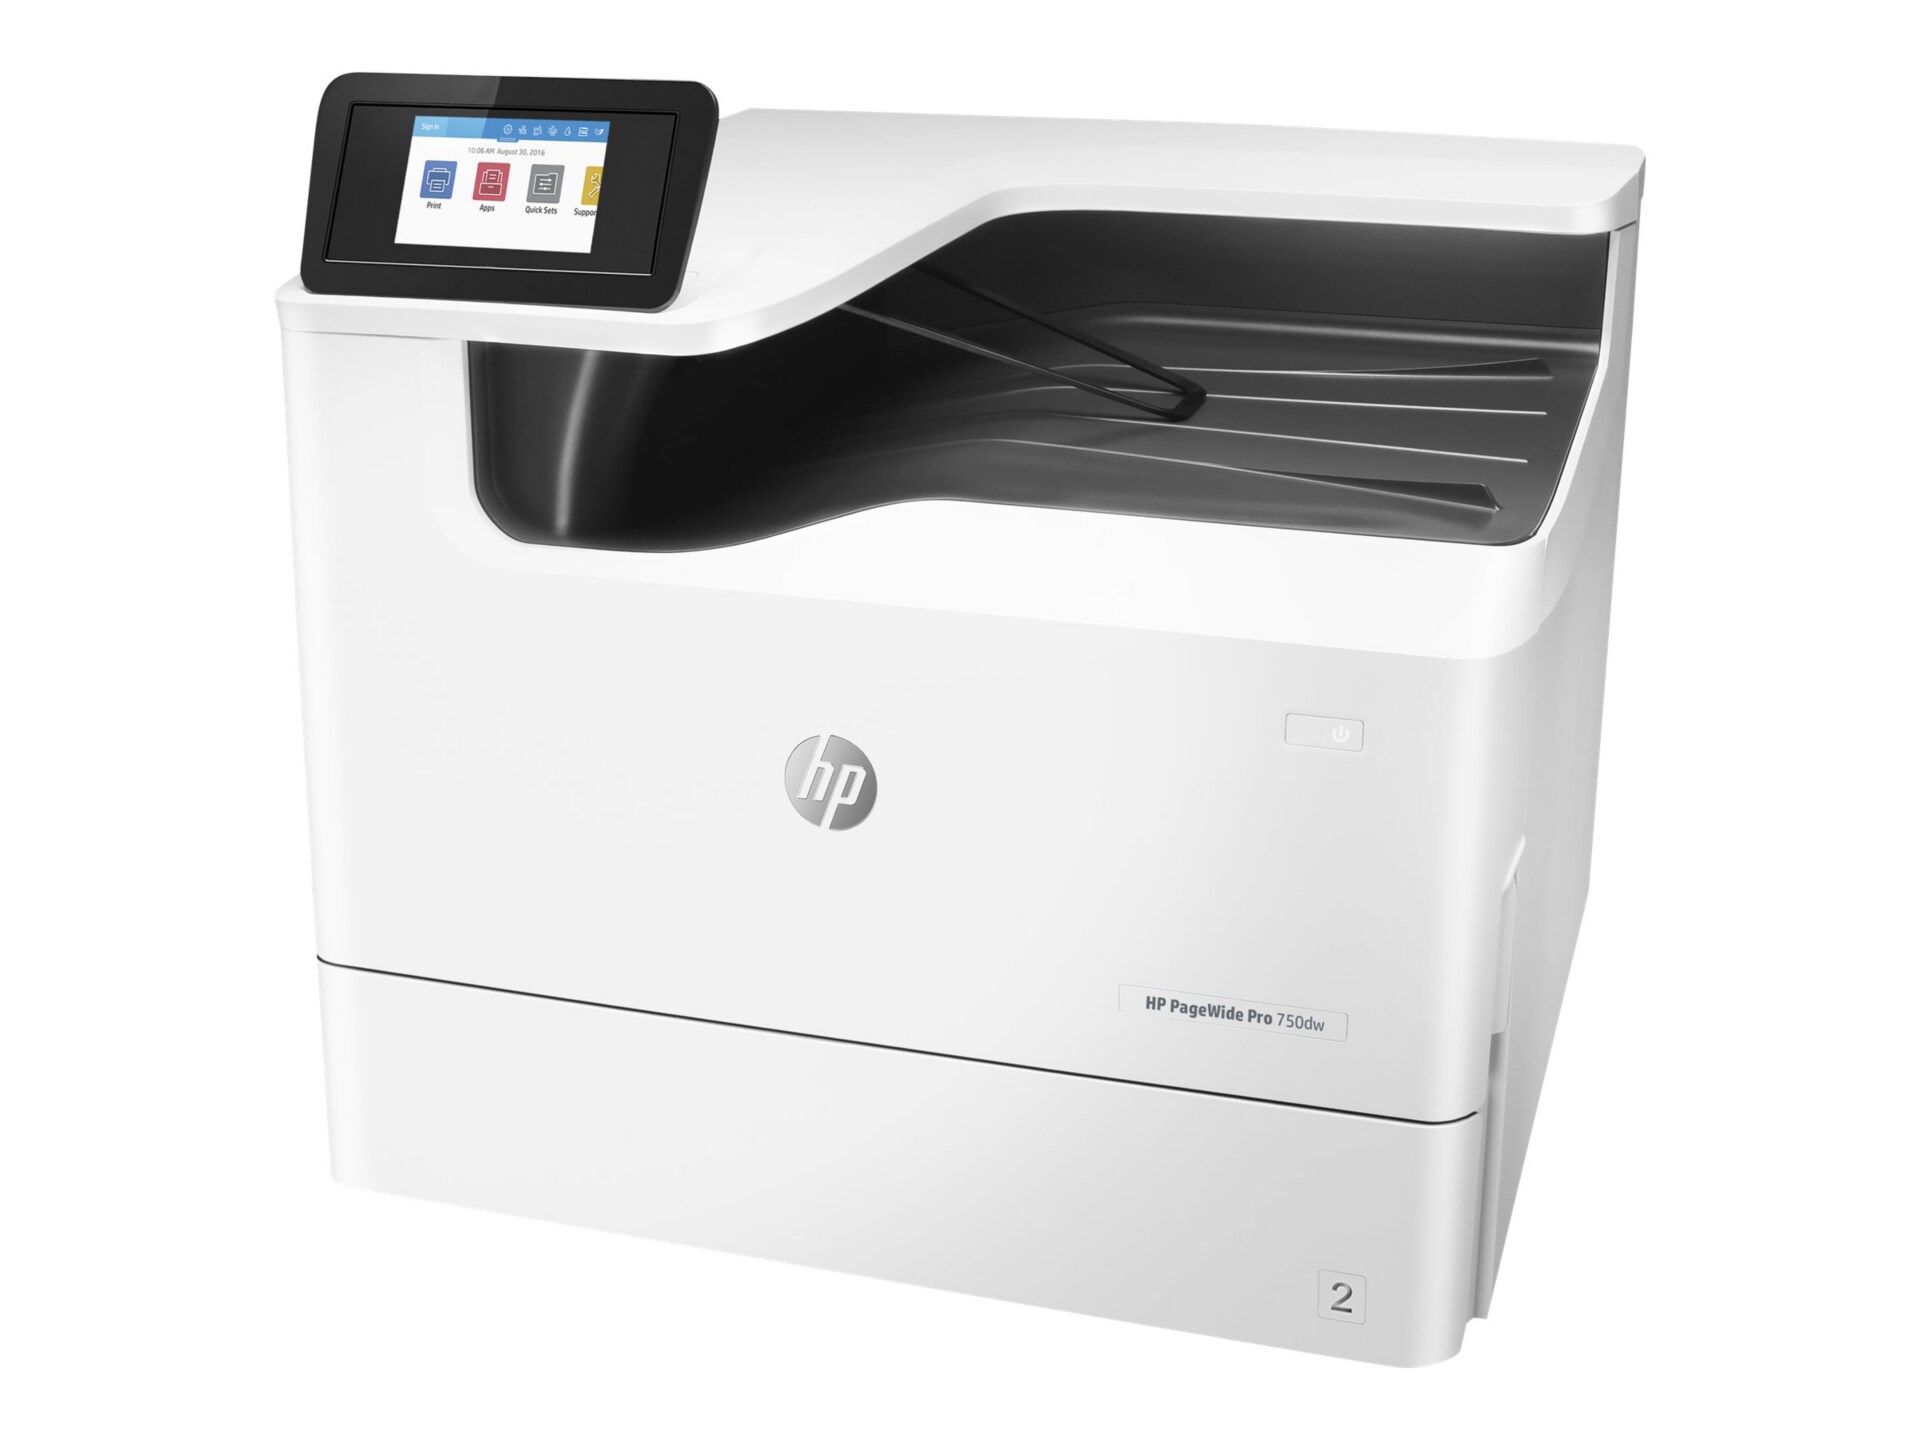 HP PageWide Pro 750dw - printer - color - page wide array